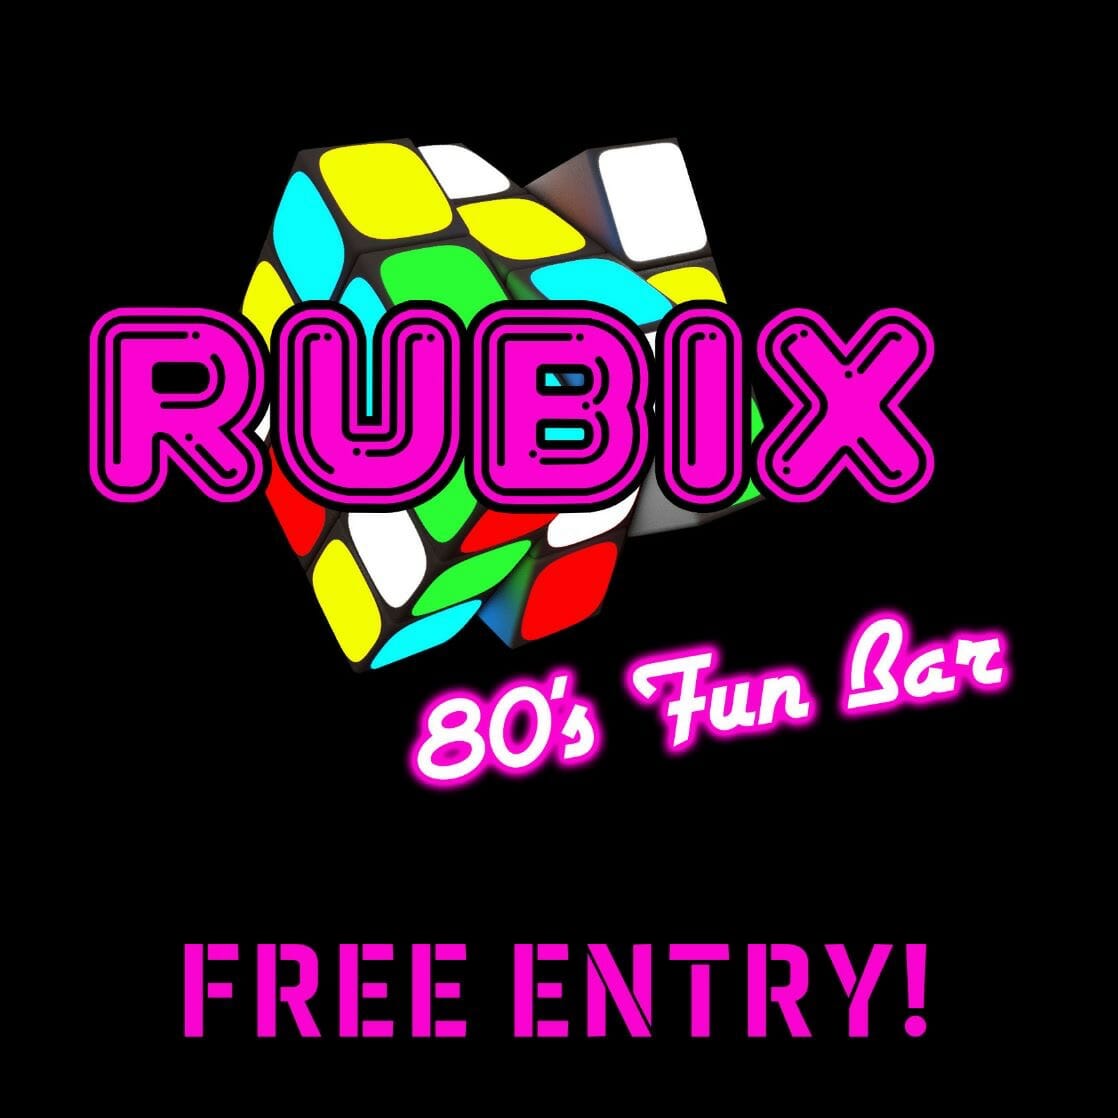 Rubix – 80’s 3D Party this weekend at Rubix Bar